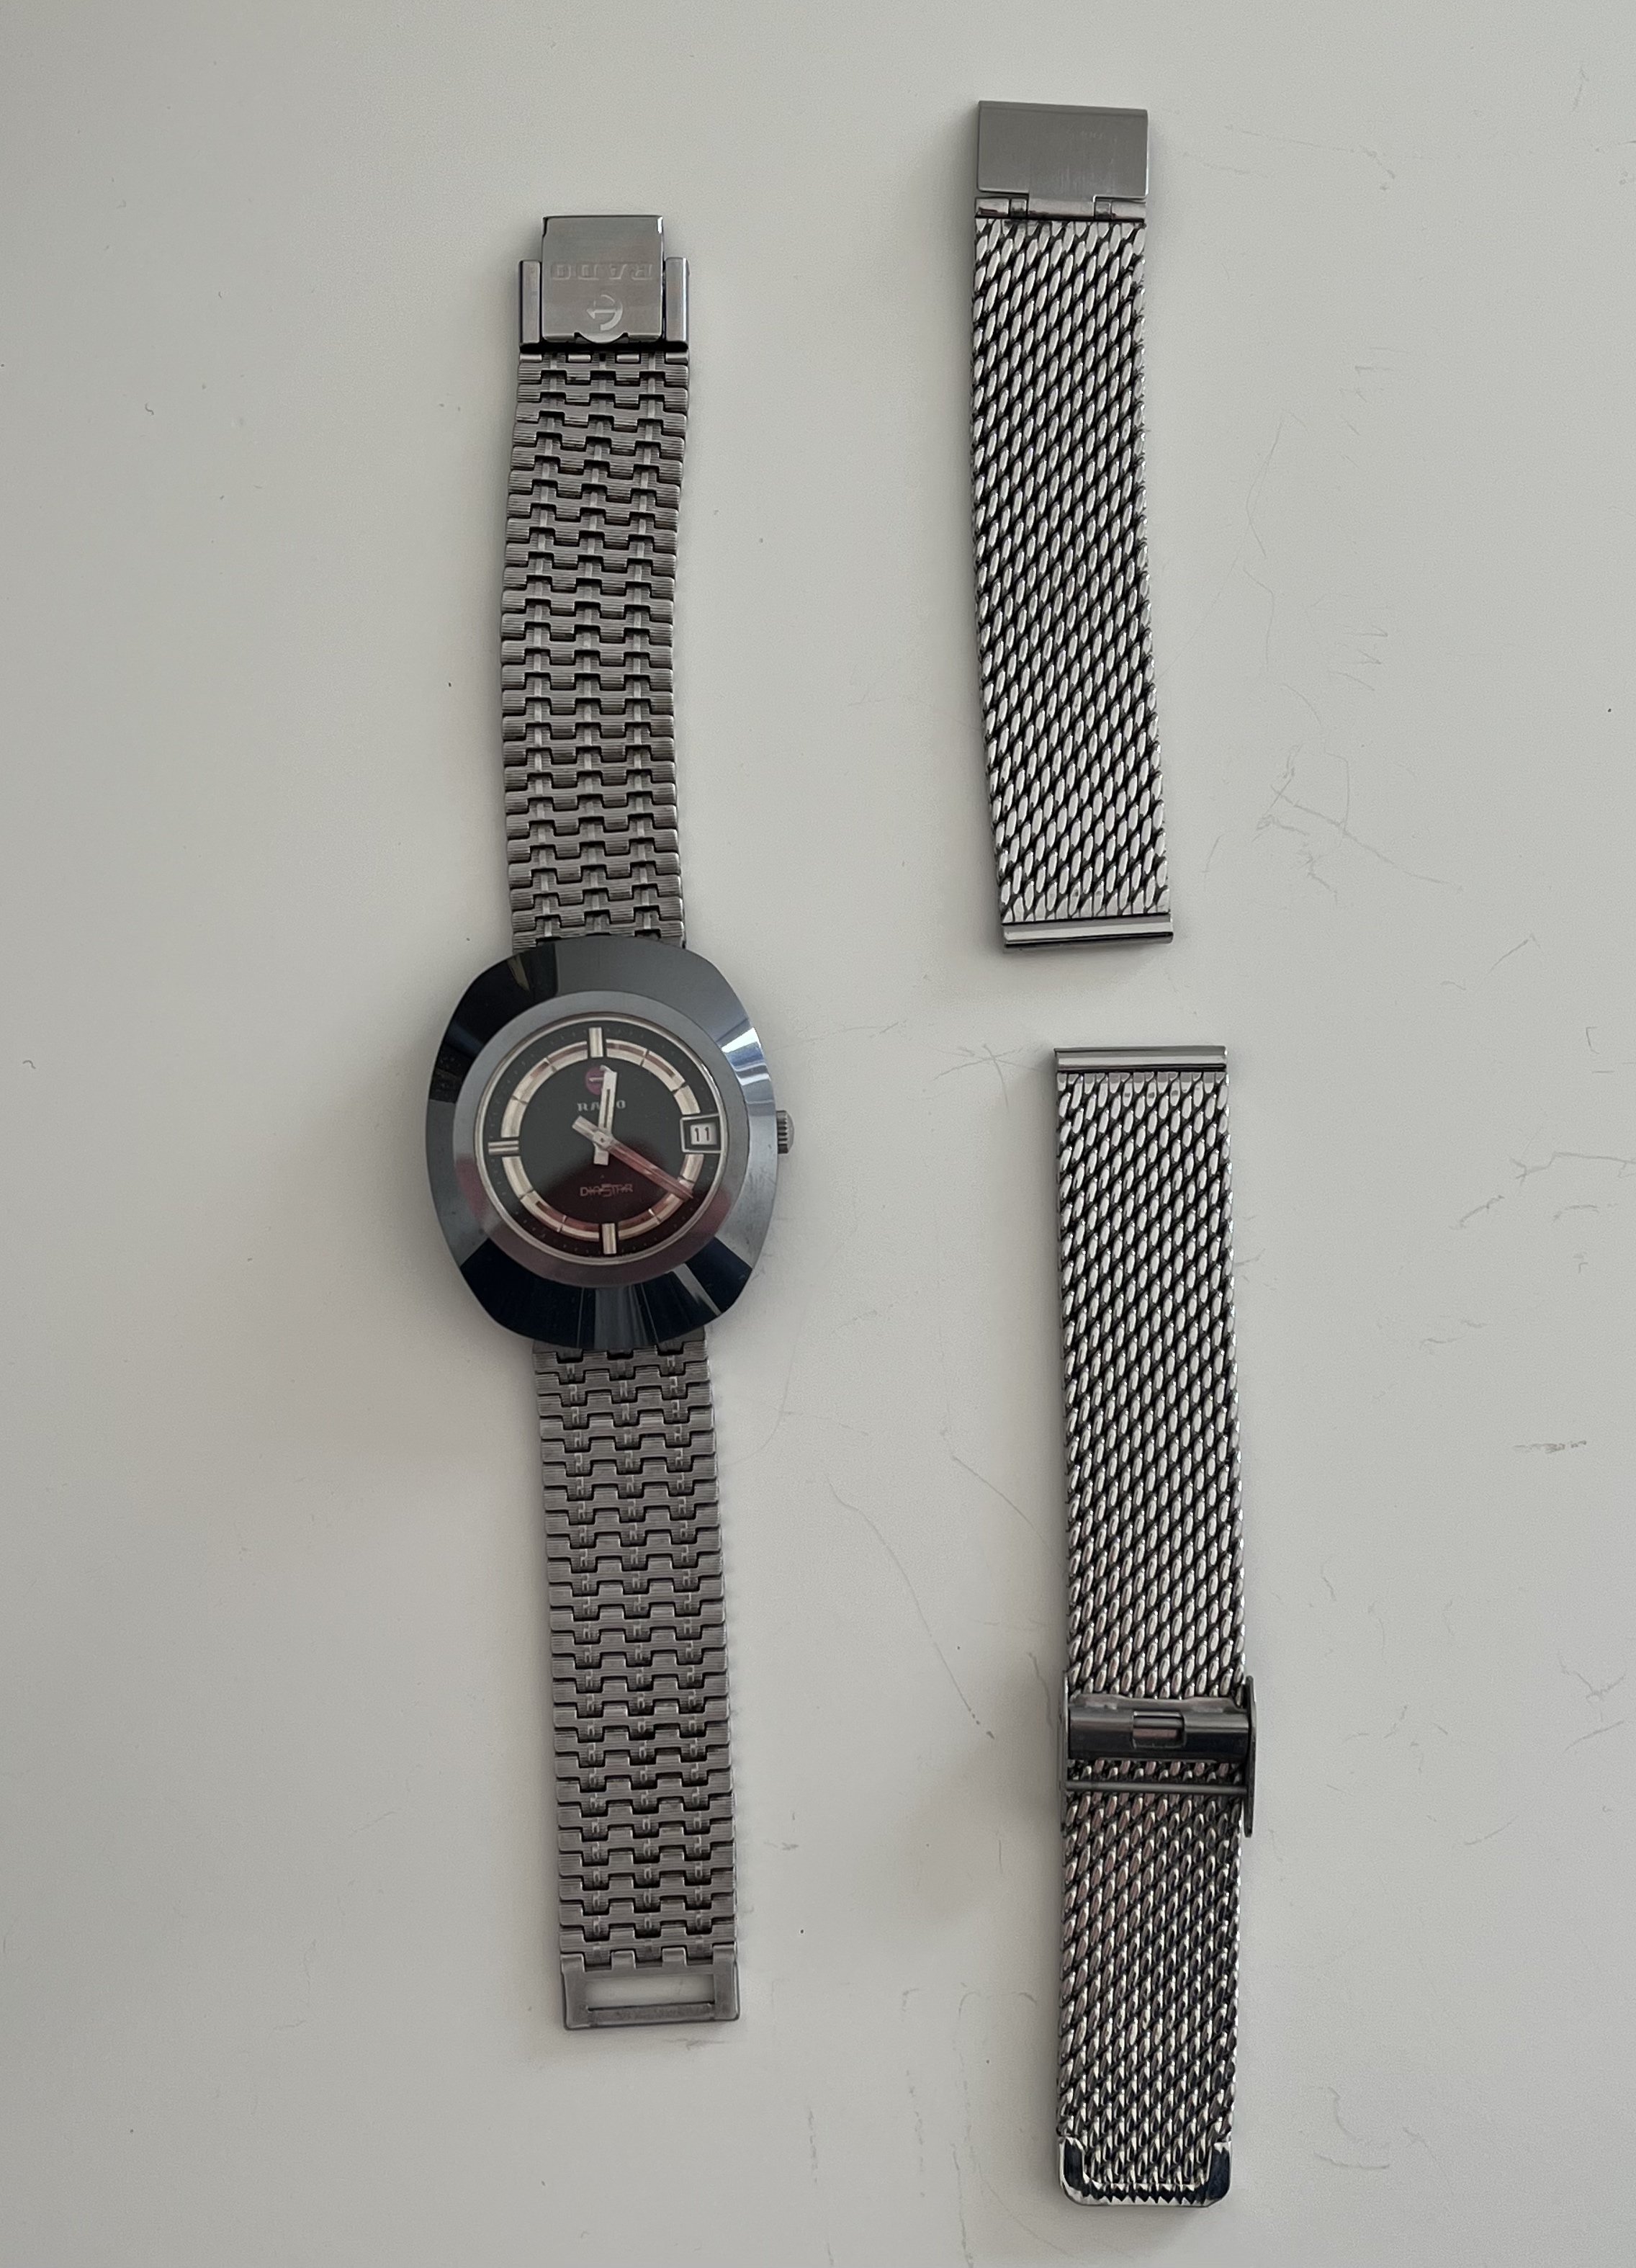 Rado 18mm Stainless Steel Bracelet 1970s 6 34 Fits 8 Wrist for Rs5106  for sale from a Private Seller on Chrono24